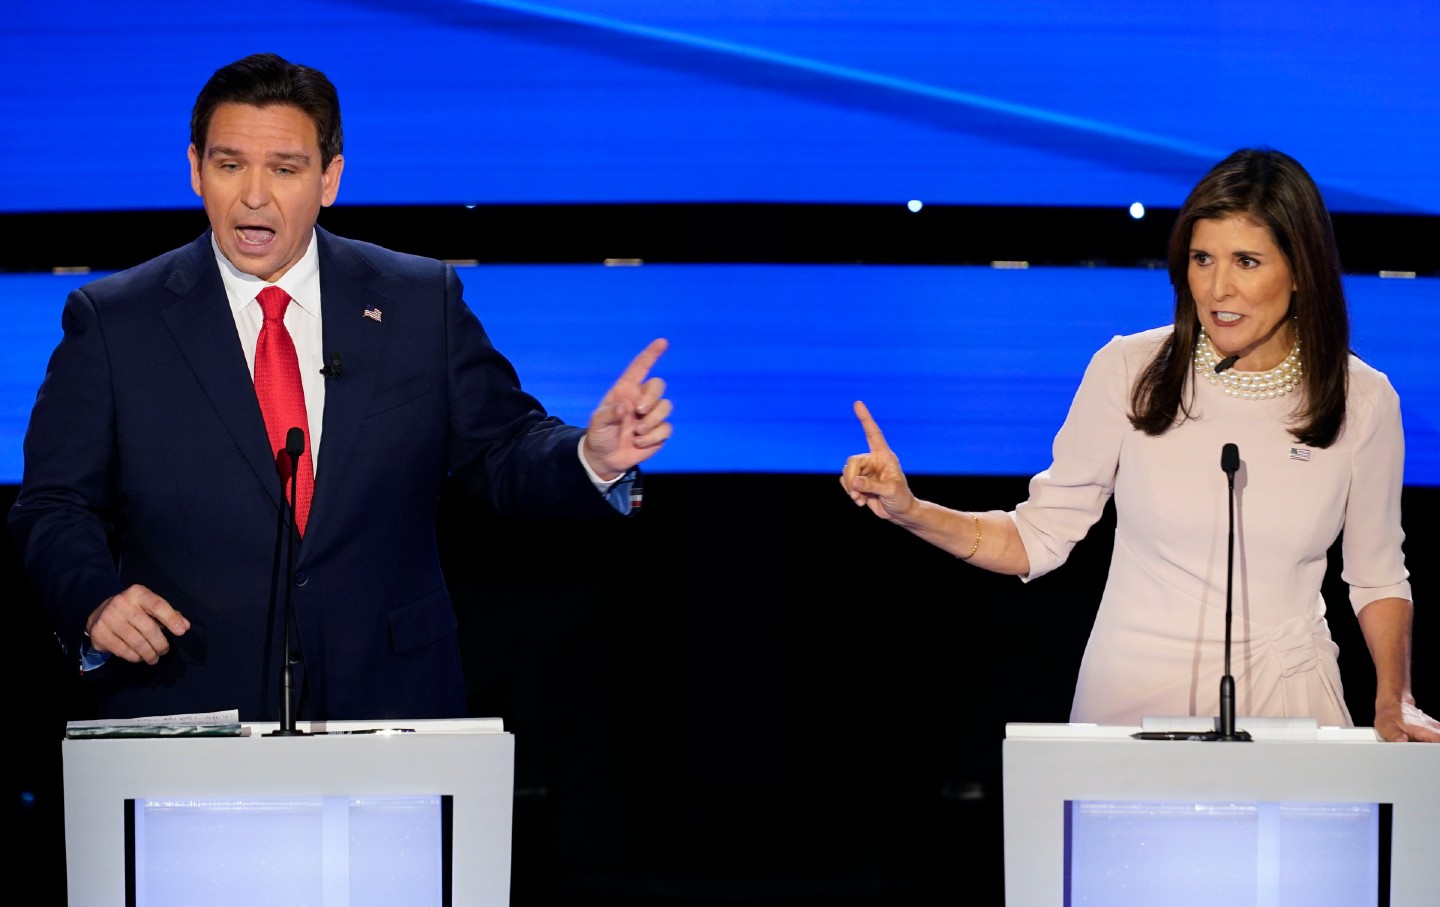 Former UN ambassador Nikki Haley, right, and Florida Governor Ron DeSantis, left, speak at the same time at the CNN Republican presidential debate in Des Moines, Iowa, on January 10, 2024.